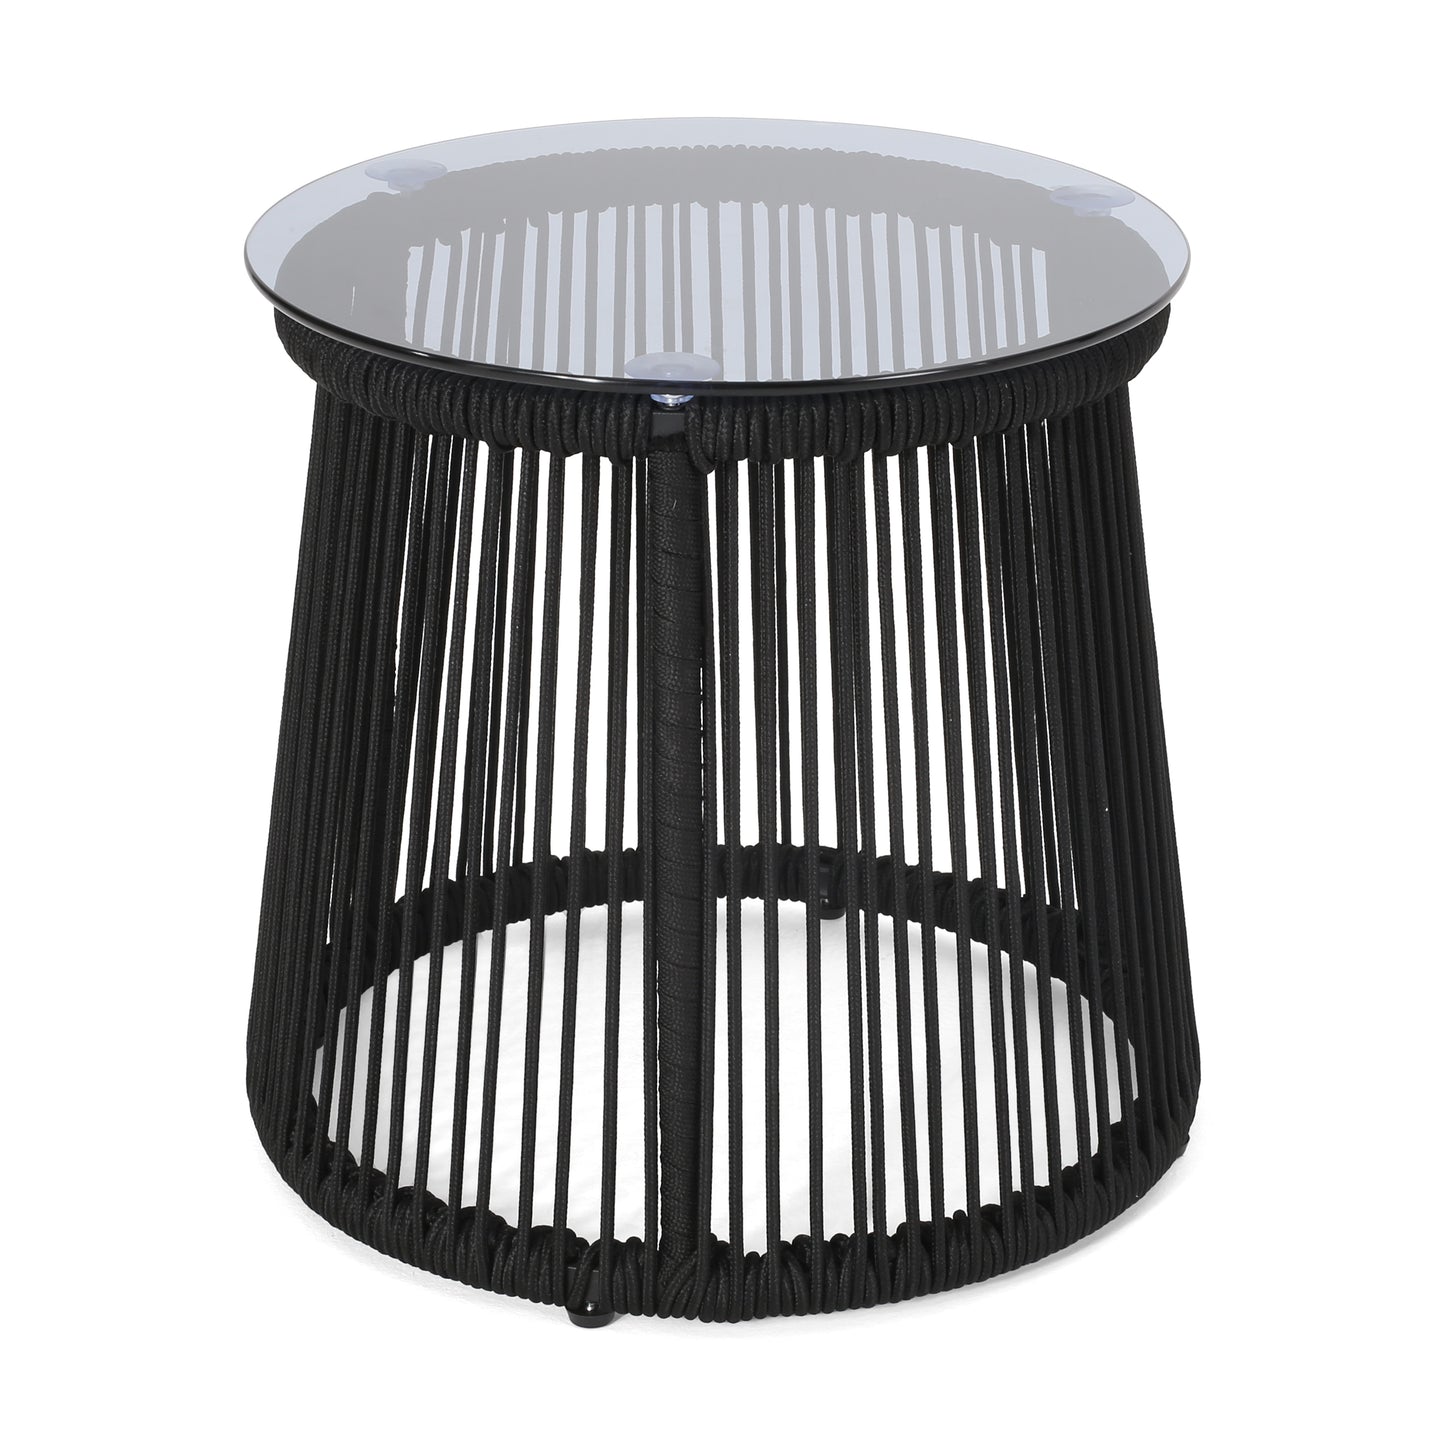 Laycee Modern Outdoor Rope Weave Side Table with Tempered Glass Top